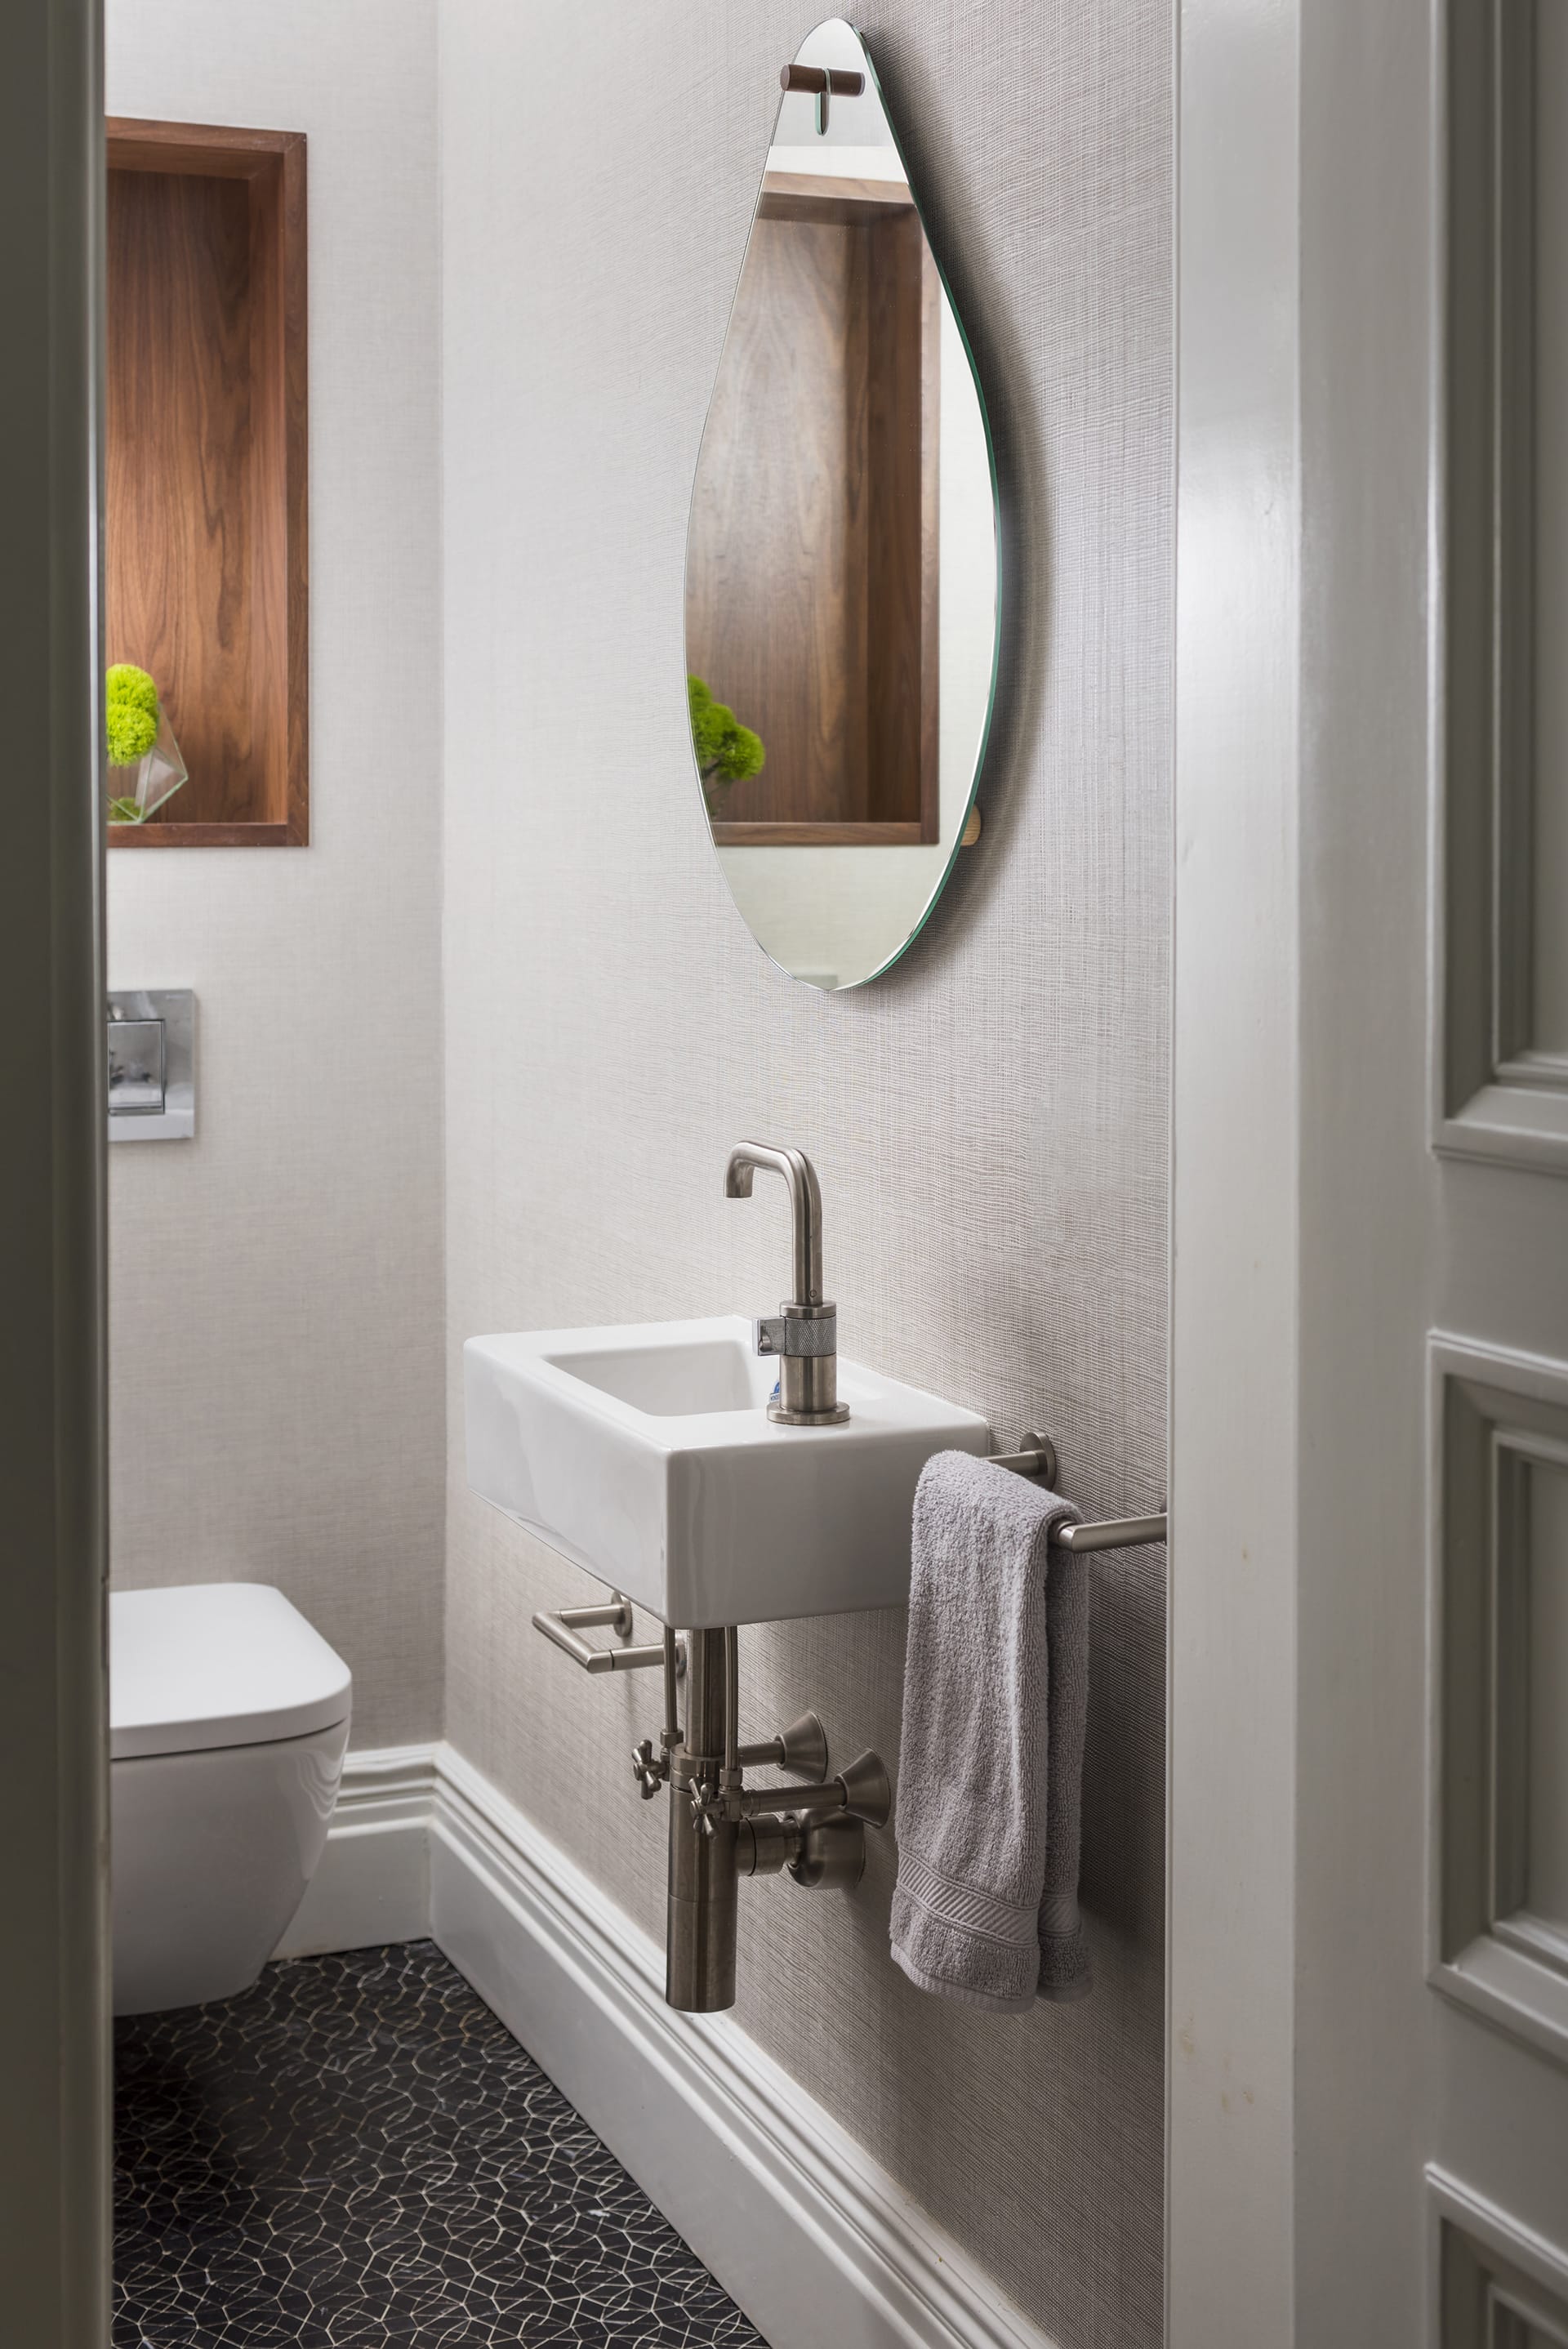 Powder room with a teardrop shaped mirror, wooden niche, and textured tan wallpaper